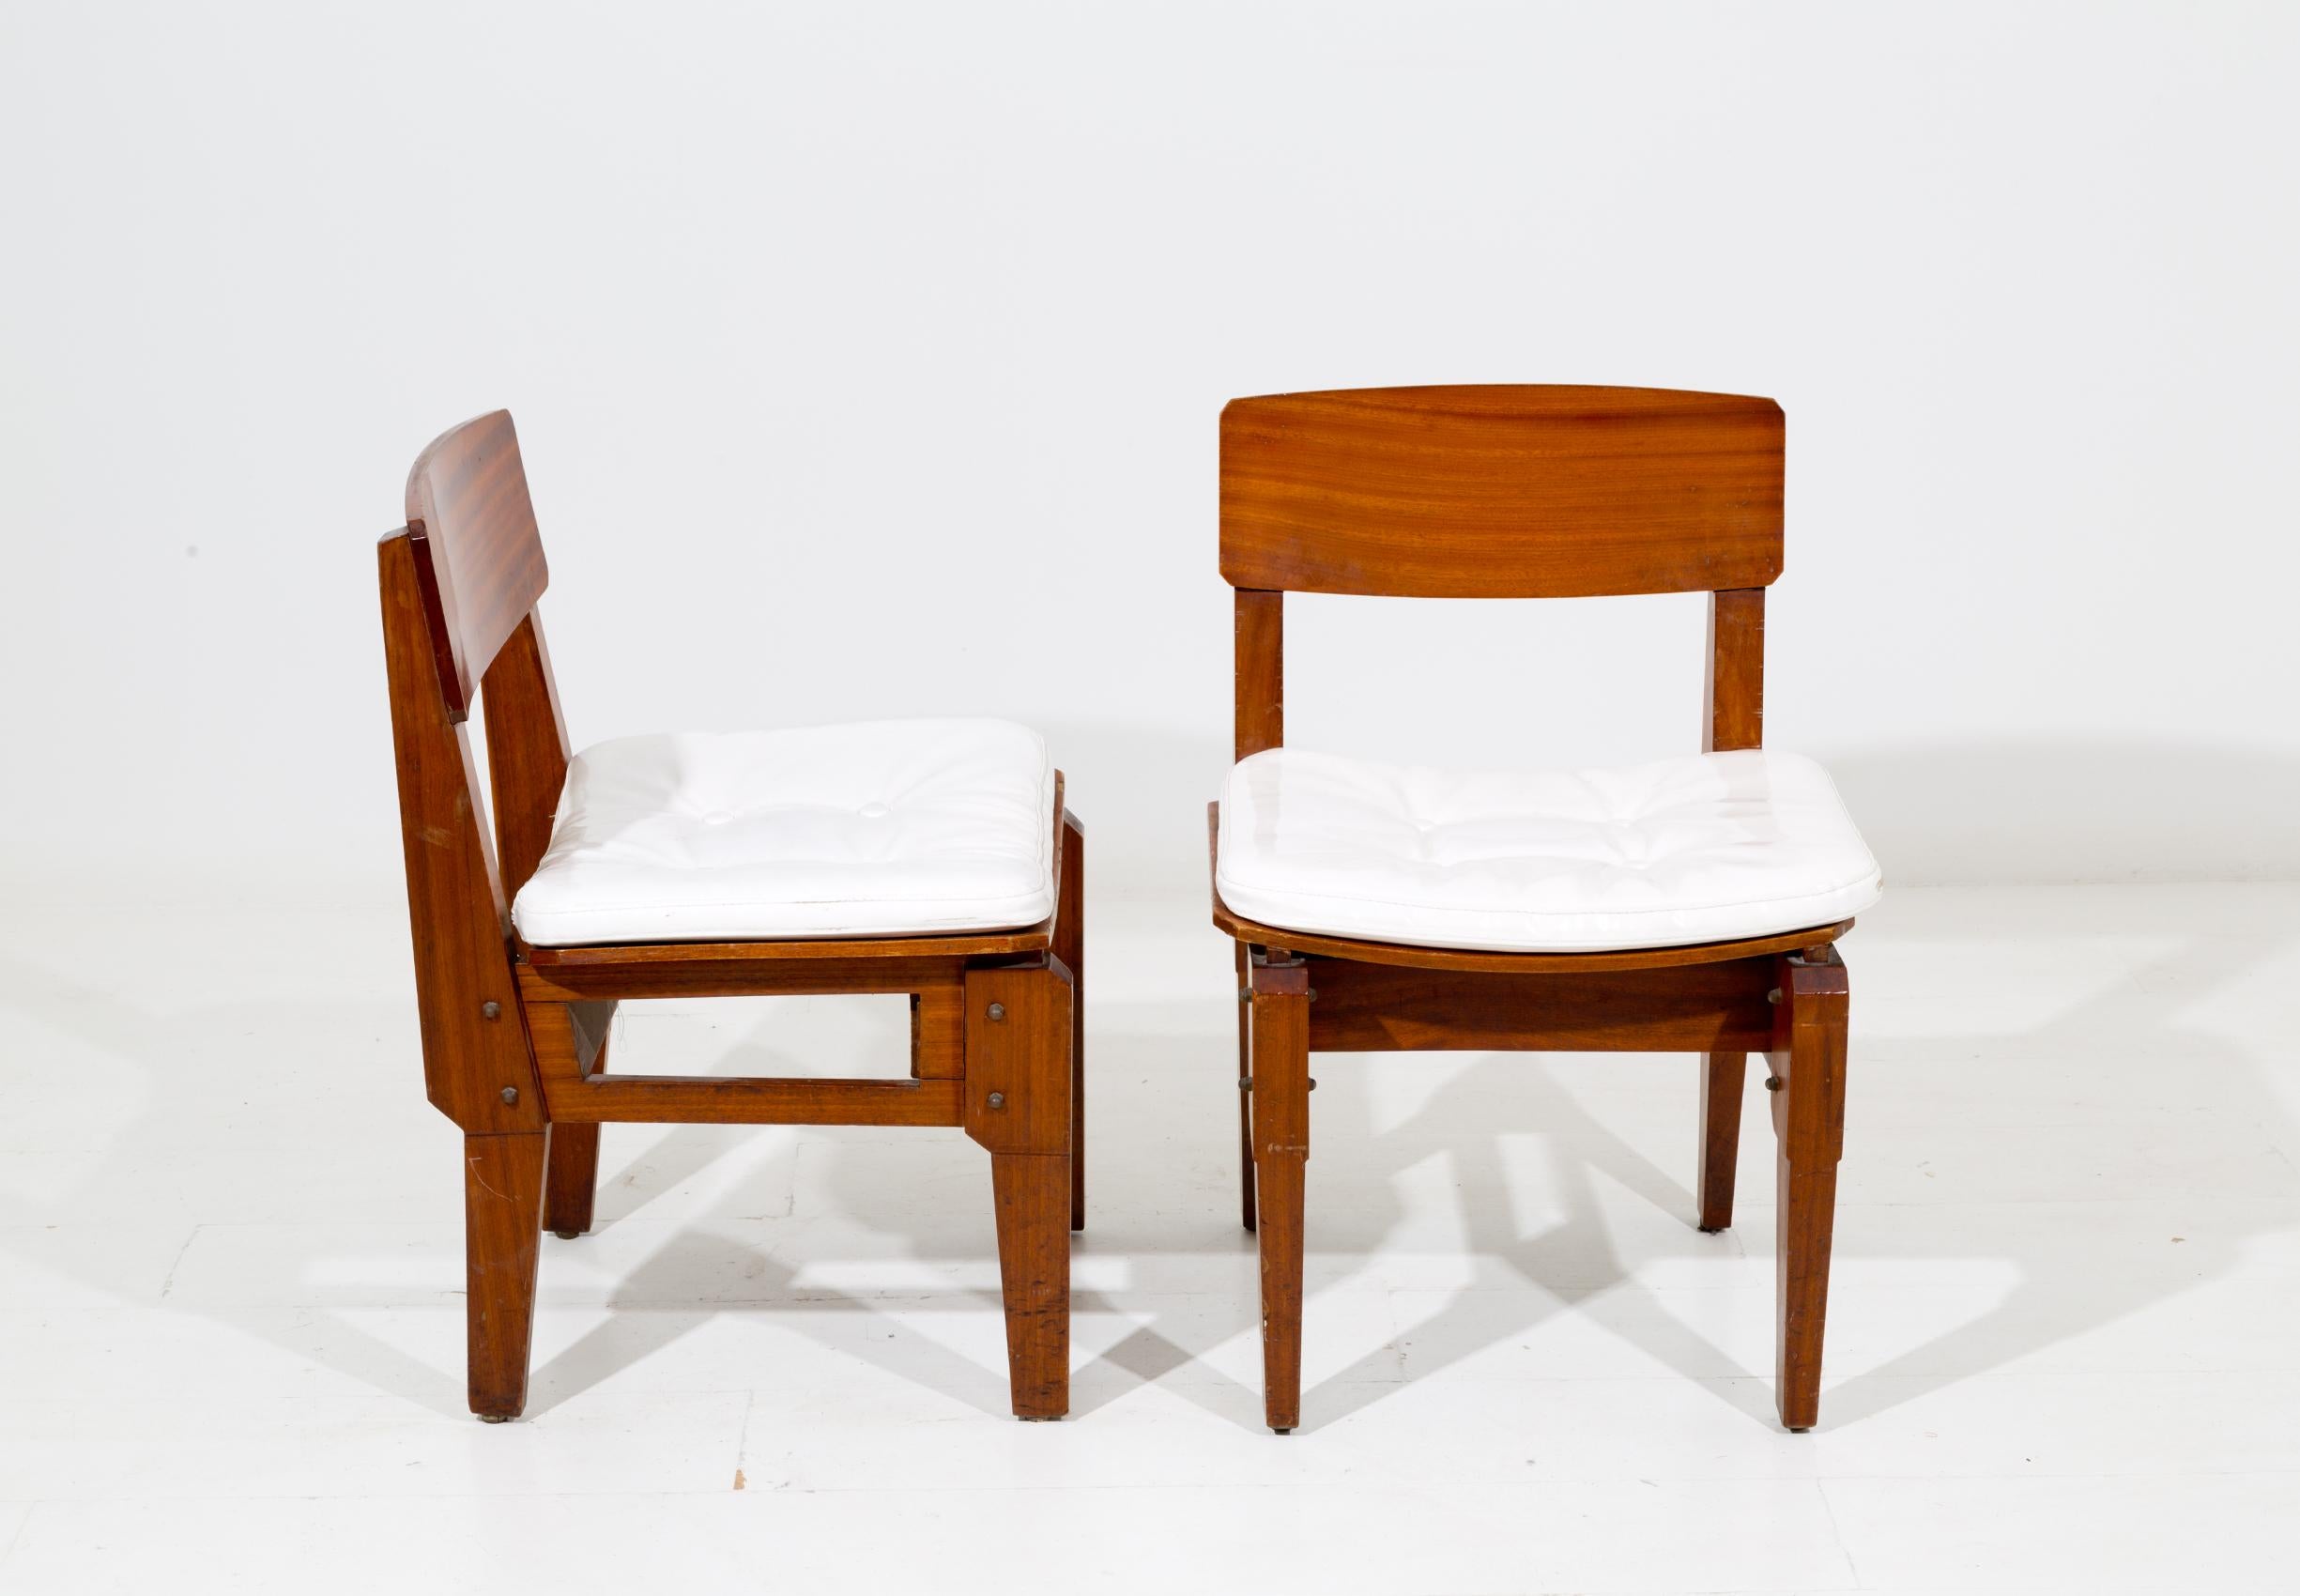 Rare set of six Italian chairs designed by architect Vito SanGirardi for the Pallante shop in Bari, Palo del Colle in the 1950s. The set is made of sturdy mahogany wood. Its seat is made of white Italian fabric. The furnishings of the Pallante shop